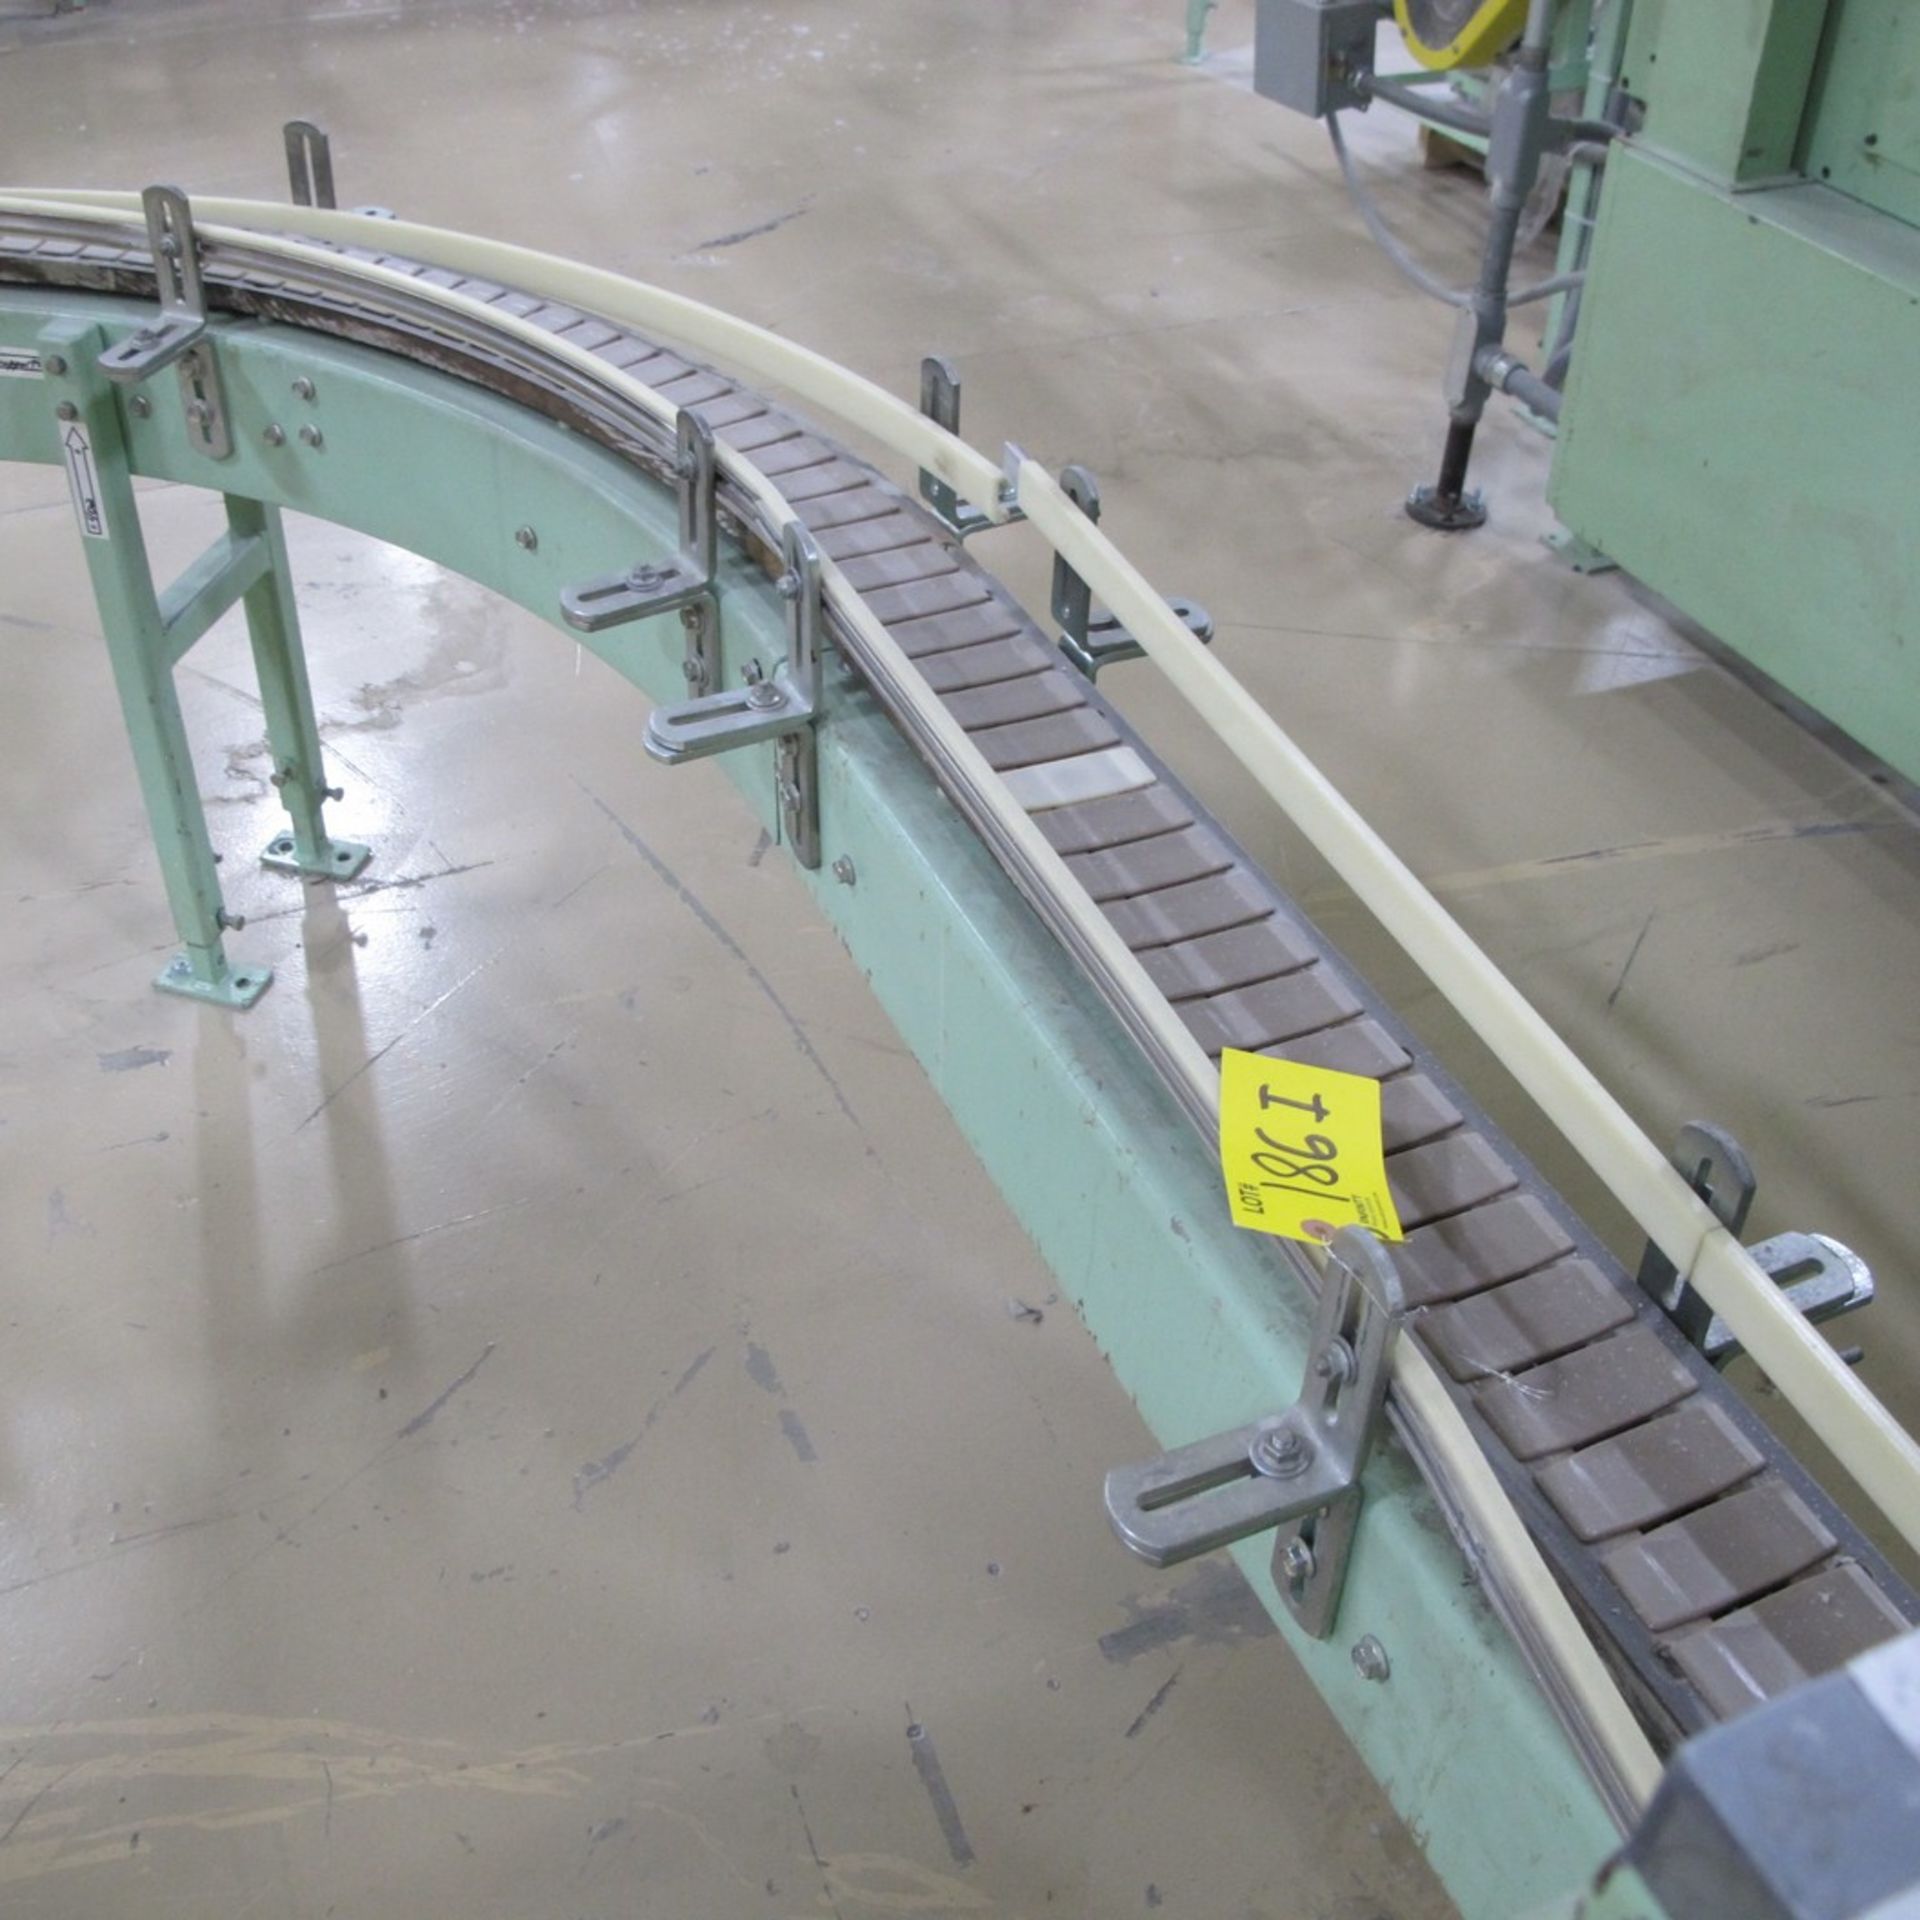 PACK AIR ASSEMBLY INC. APPROX. 35'L X 3"W POWERED CONVEYOR W/ CONTROLS (BATH B4) - Image 2 of 4